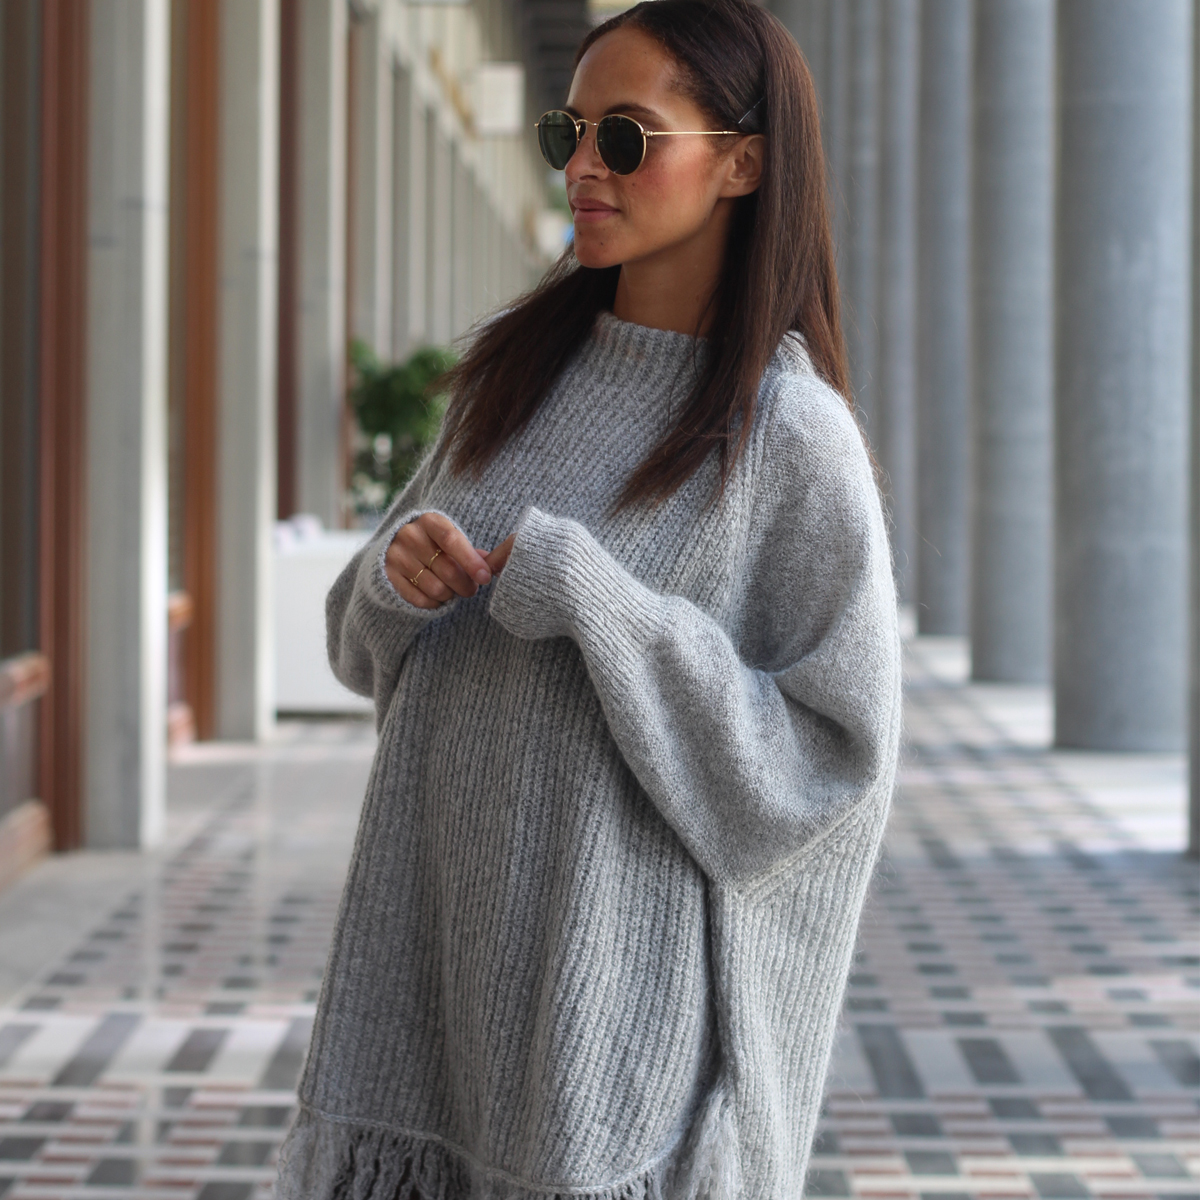 grey knit dress outfit